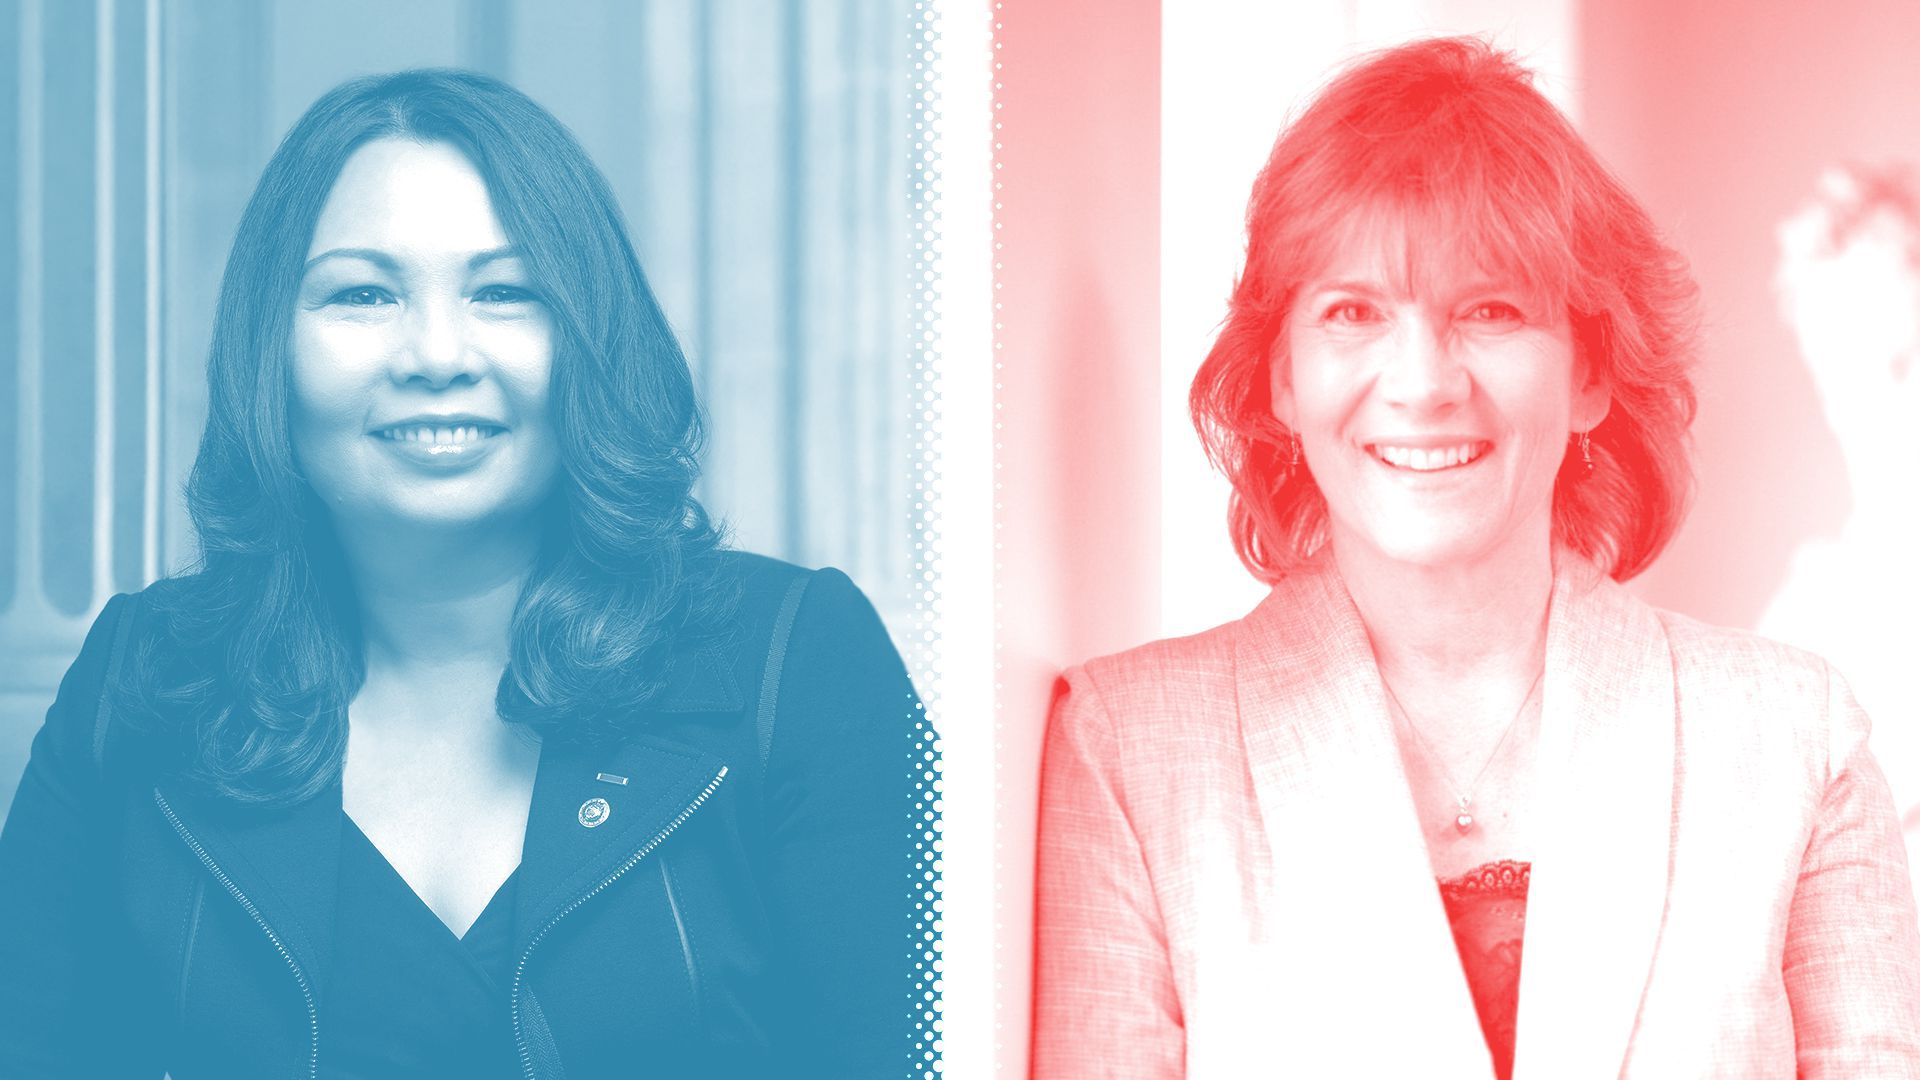 Photo illustration of Christine Tammy Duckworth, tinted blue, and Kathy Salvi , tinted red, separated by a white halftone divider.